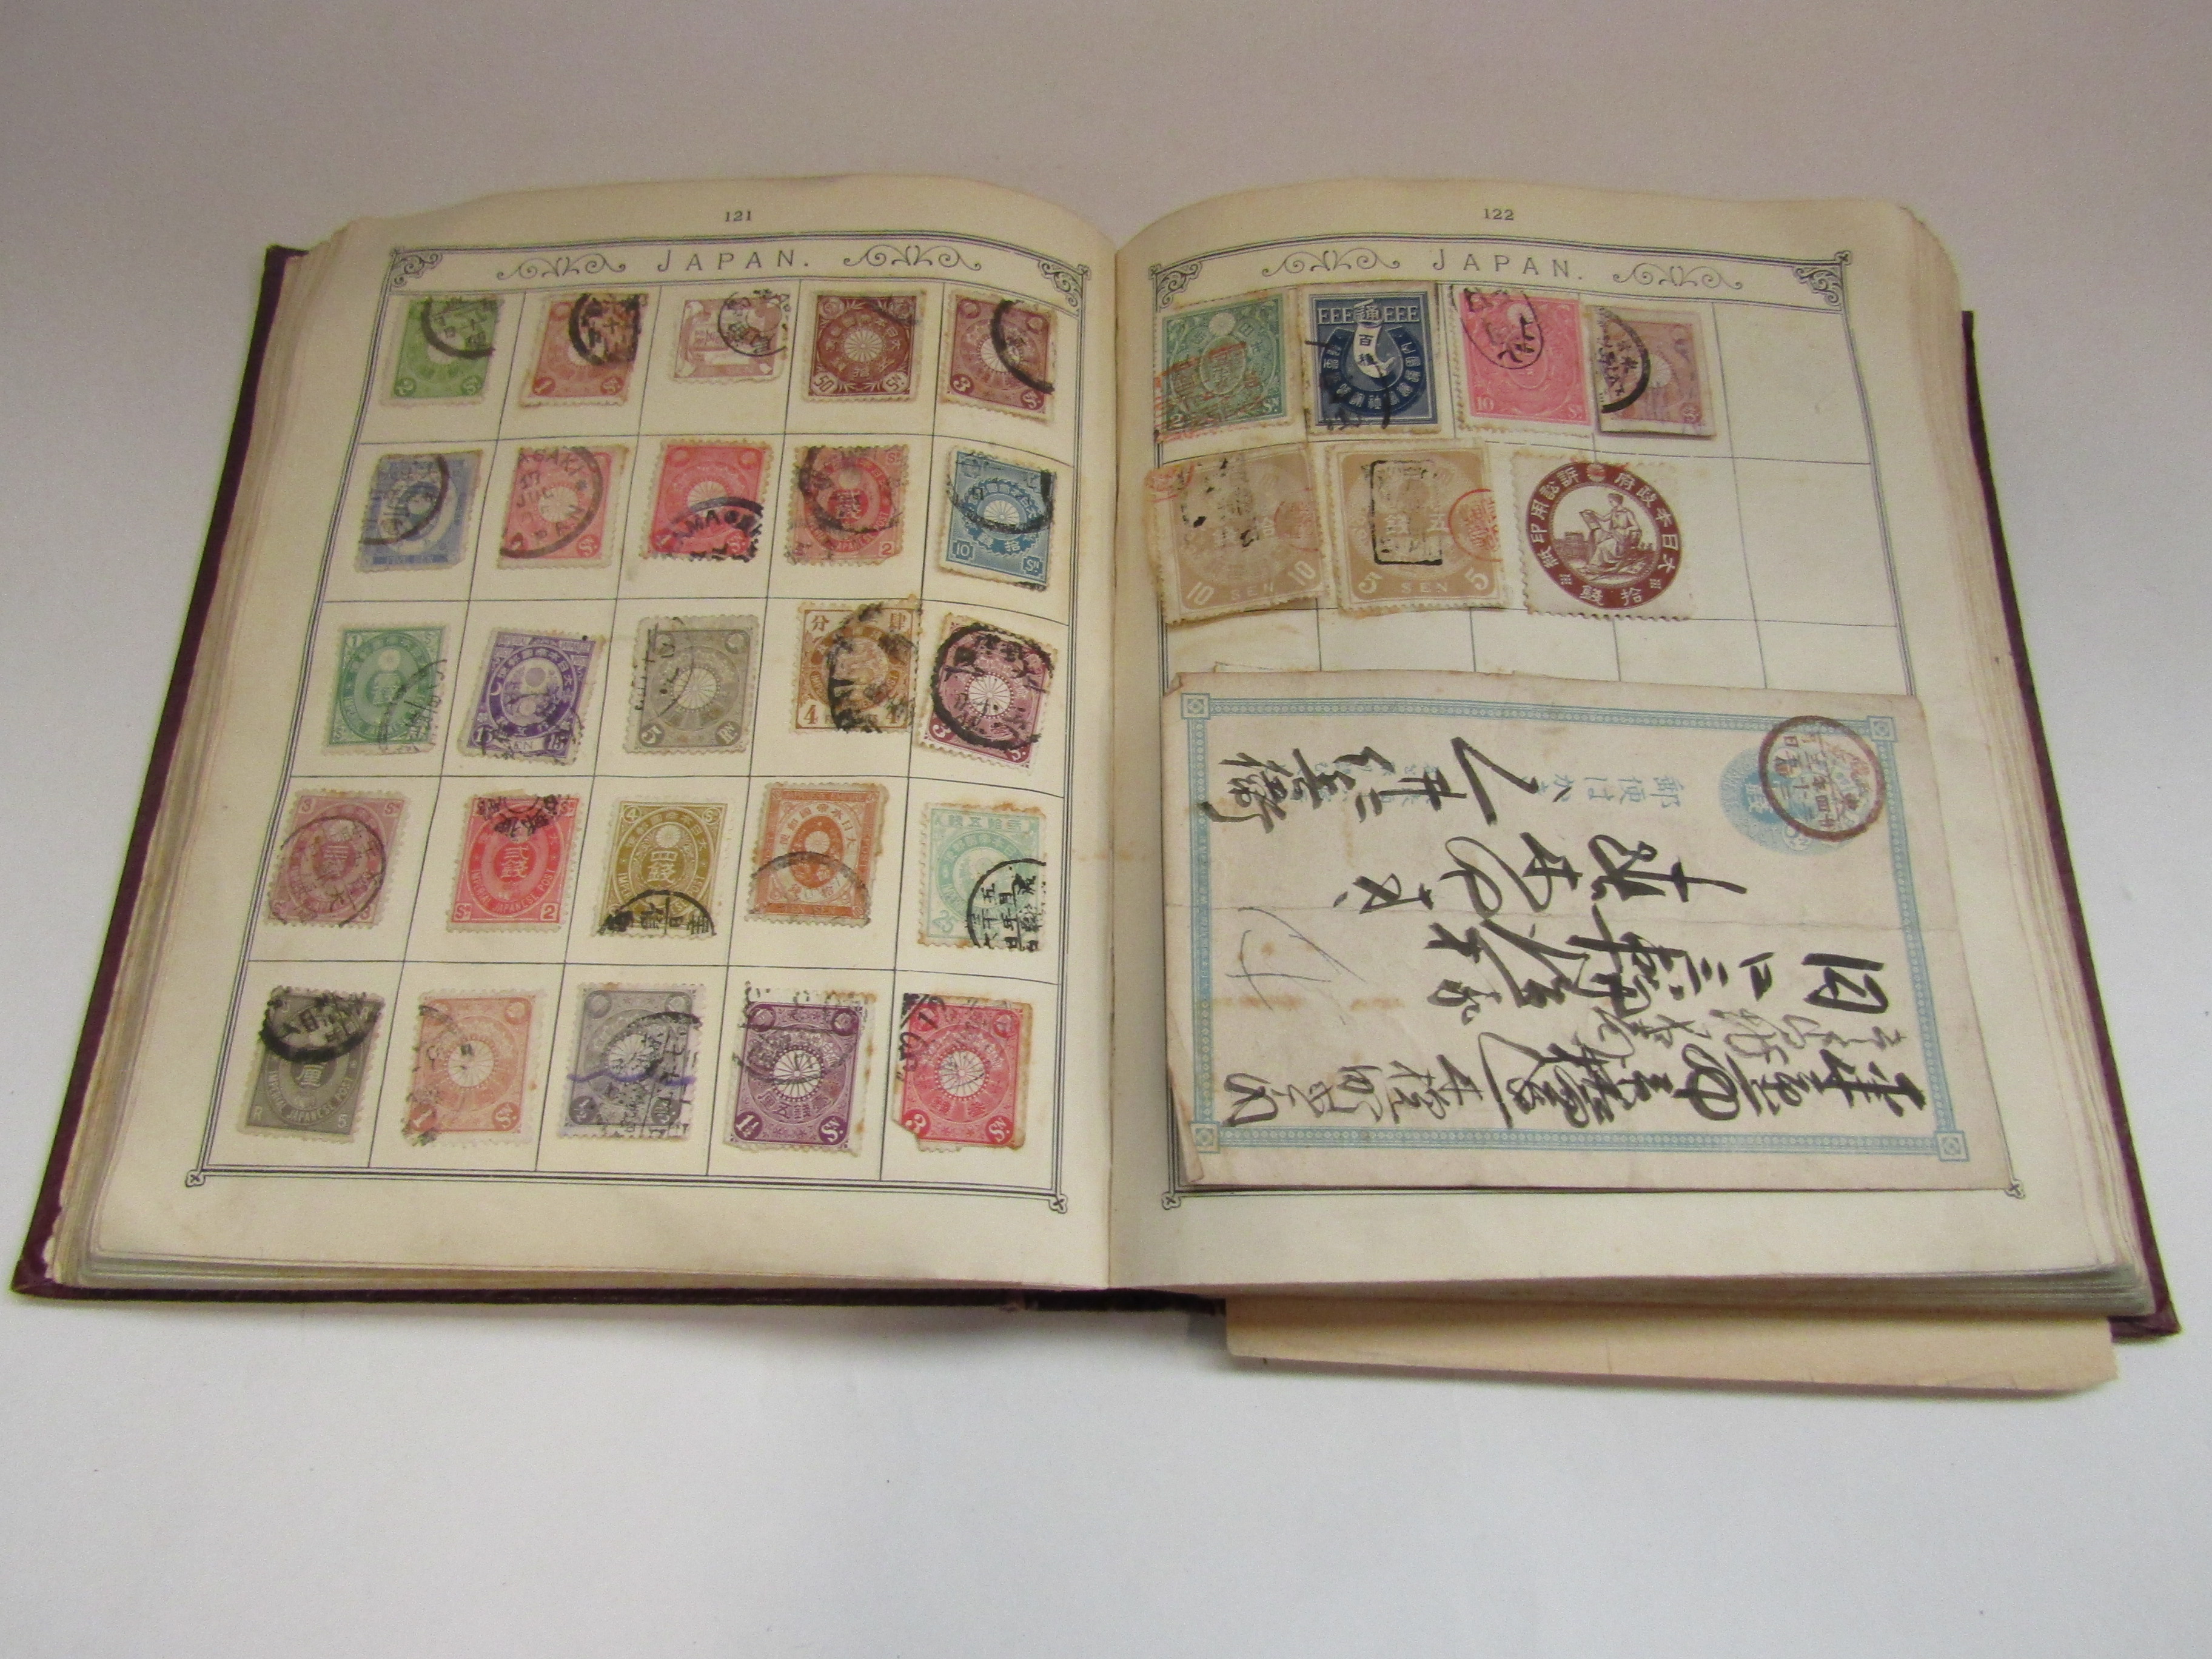 The Lincoln Stamp Album with contents